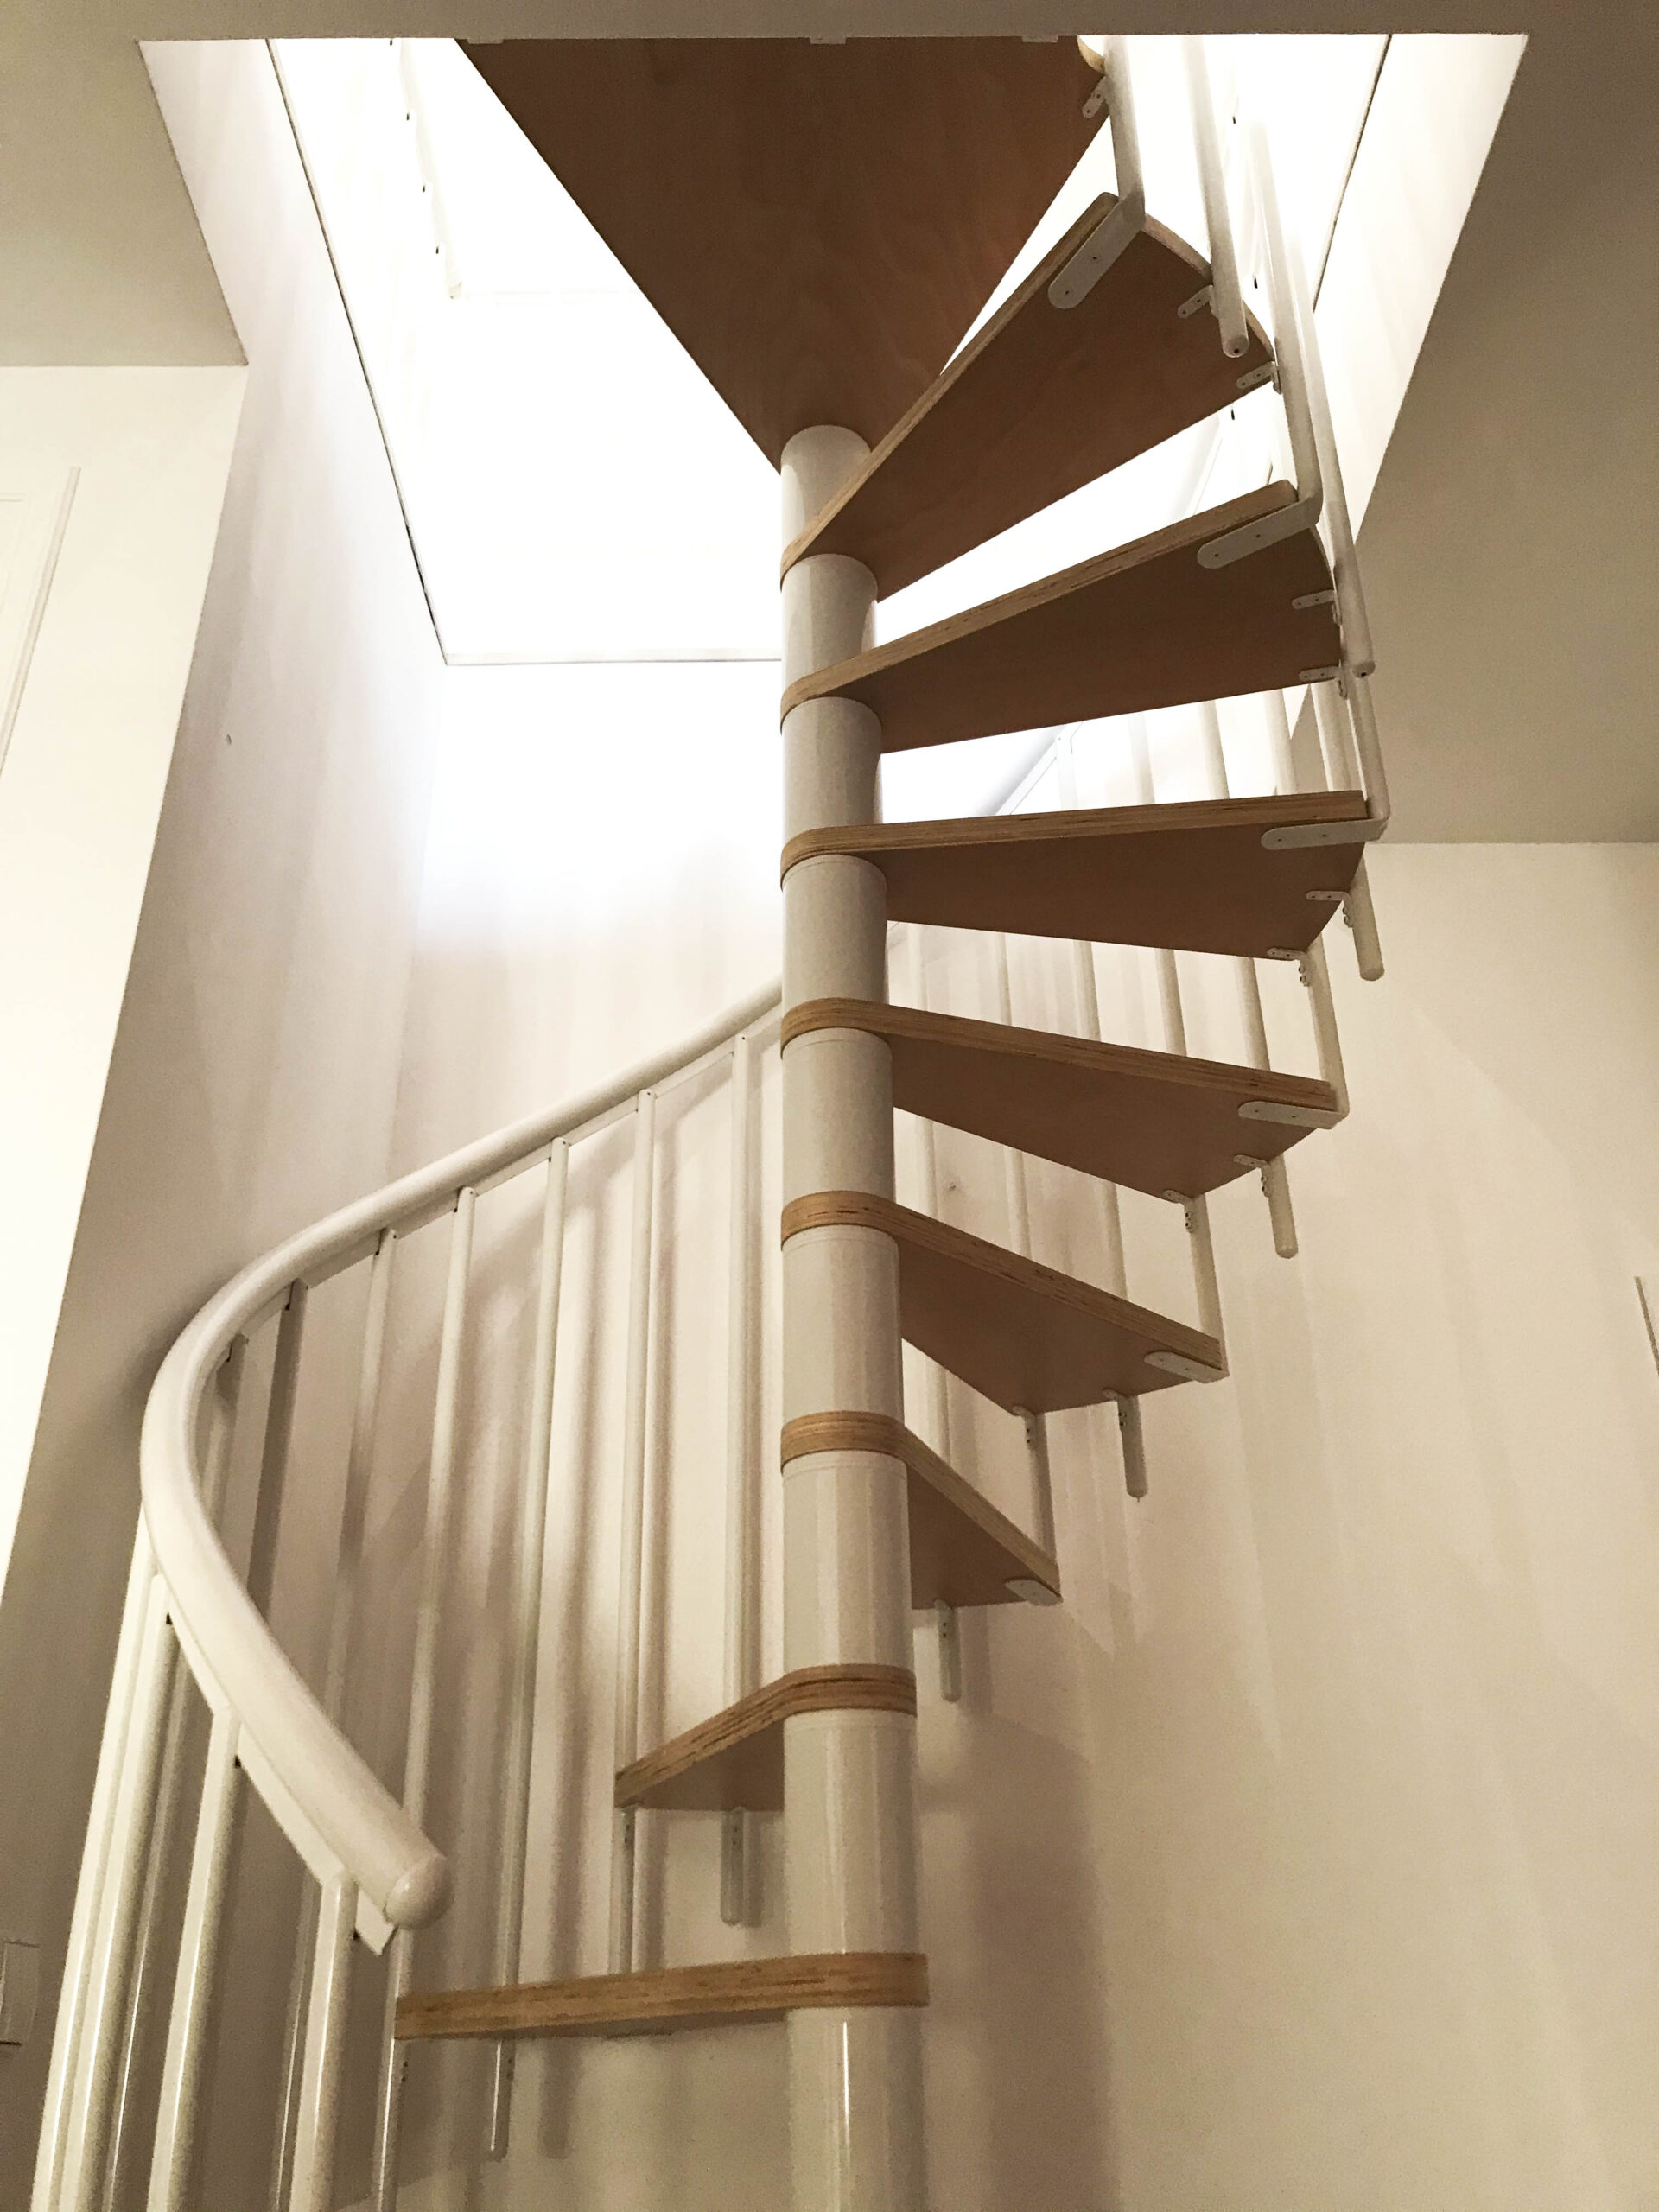 CALGARY Spiral Staircase White/Beech 120cm Extra Spindles